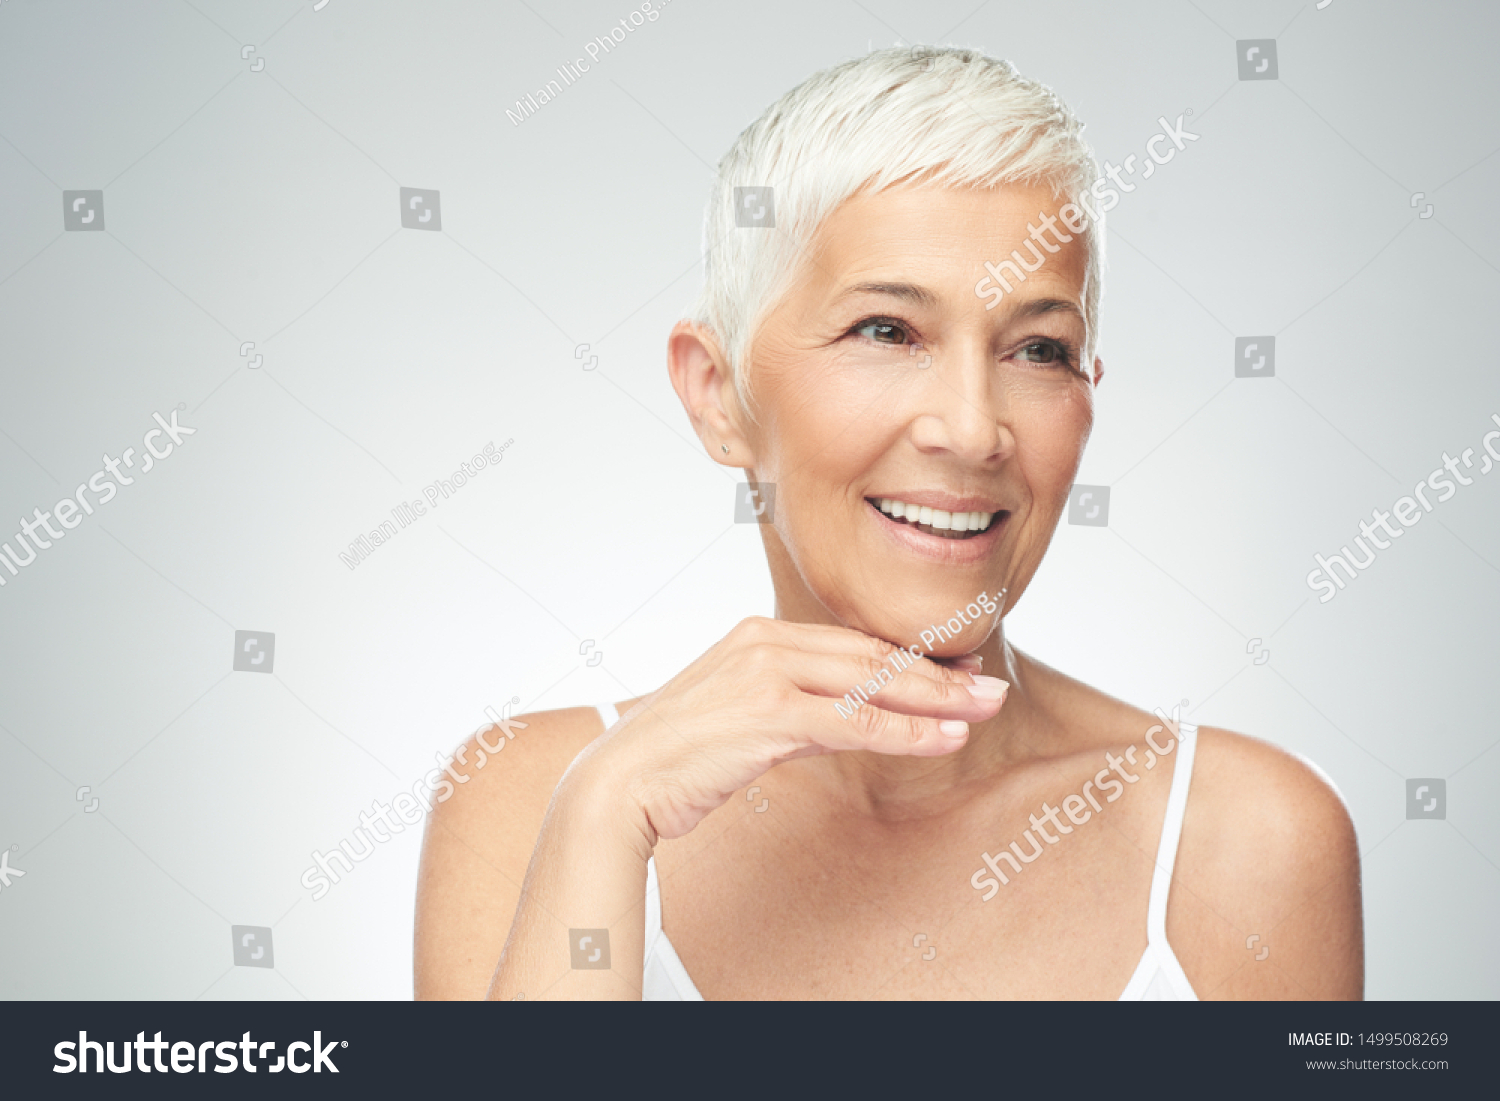 Beautiful smiling senior woman with short gray hair posing in front of gray background. Beauty photography. #1499508269